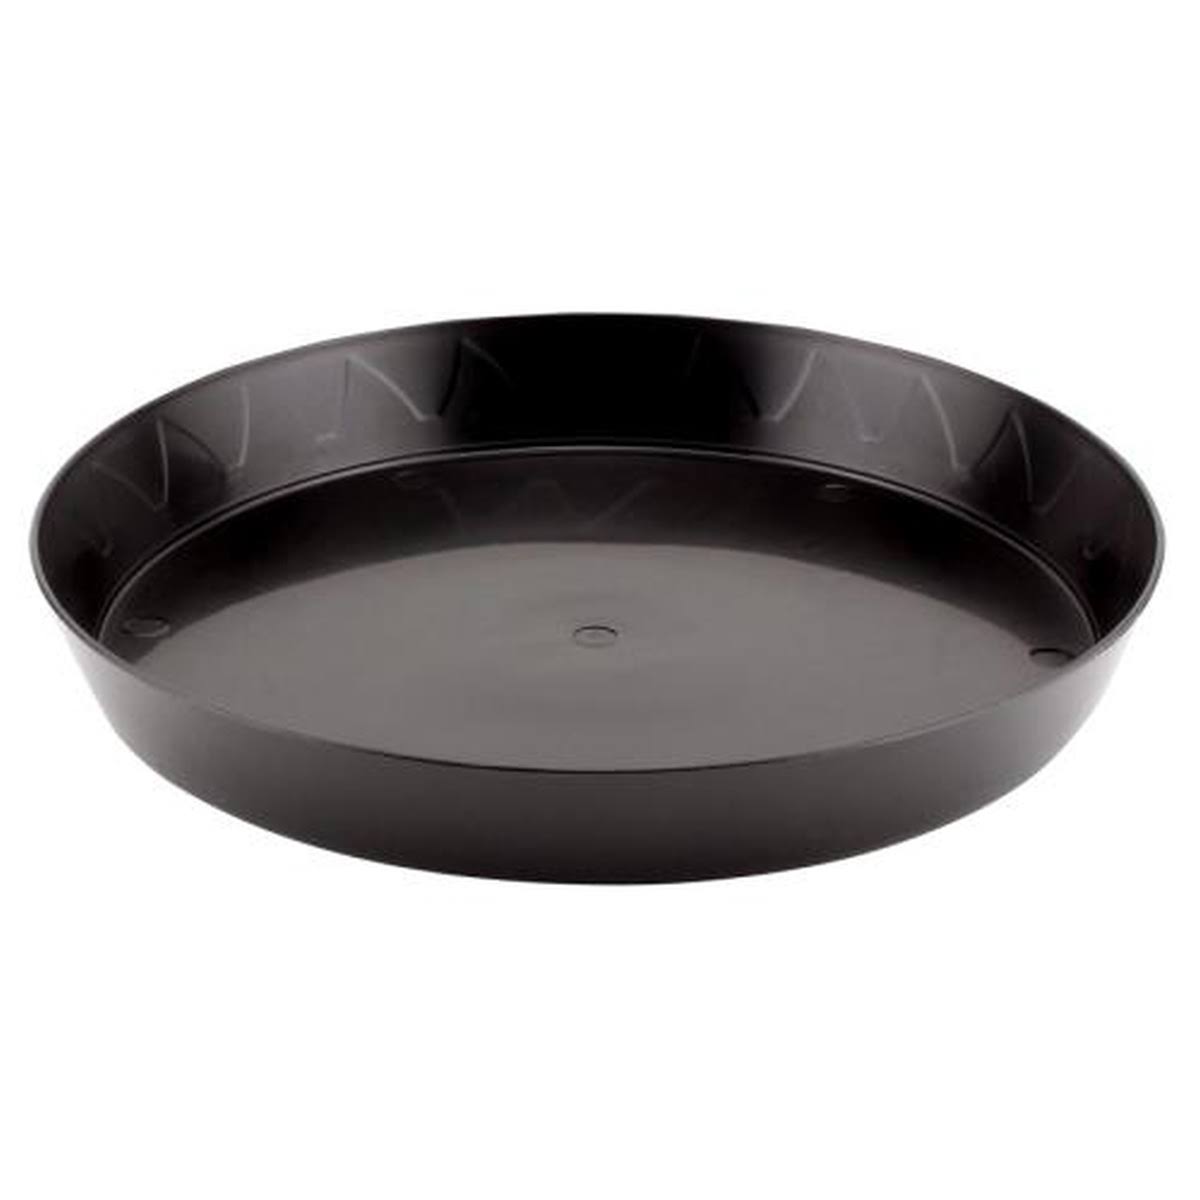 Gro Pro Garden Products Saucer - Black, 10"